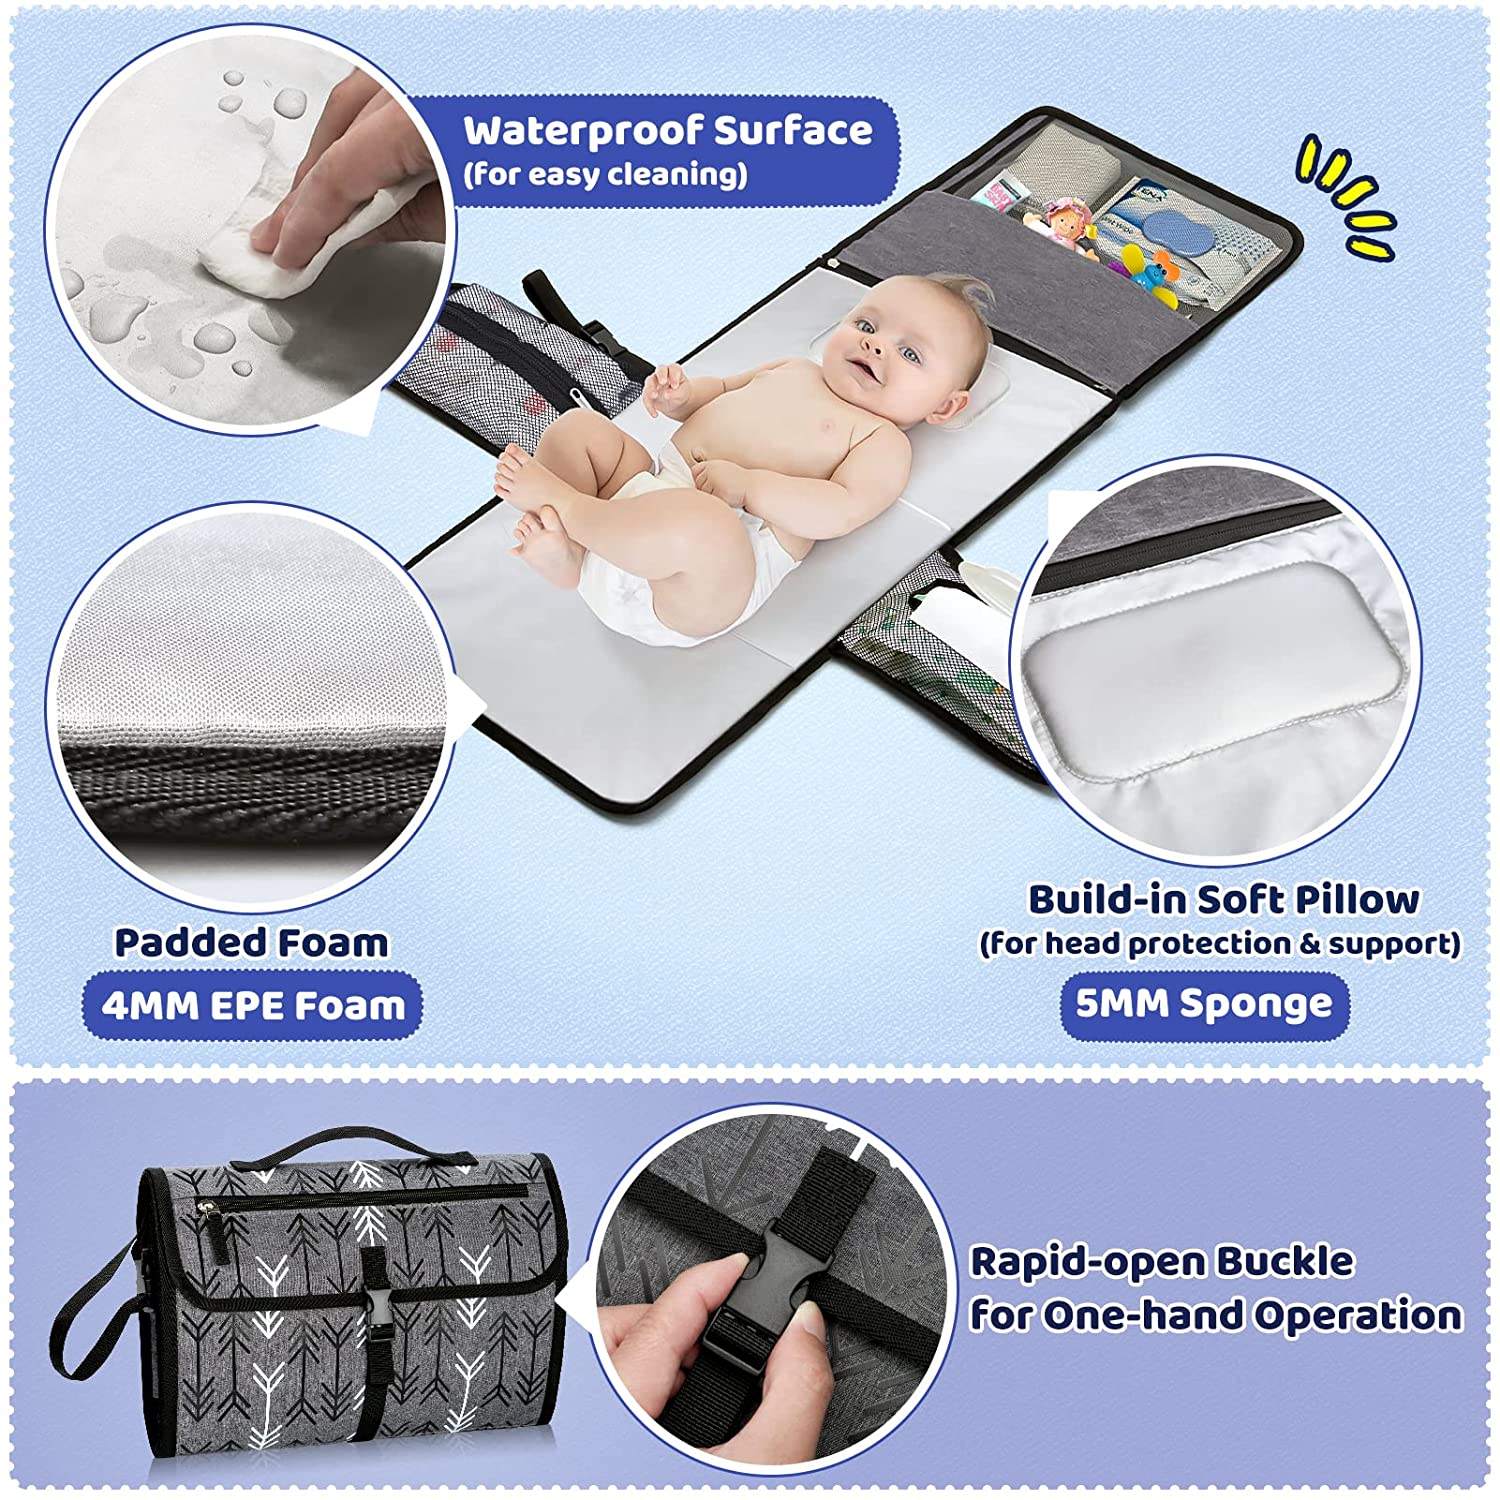 Foldable Waterproof Kids Travel Changing Mat Baby Diaper Changing Pad Portable